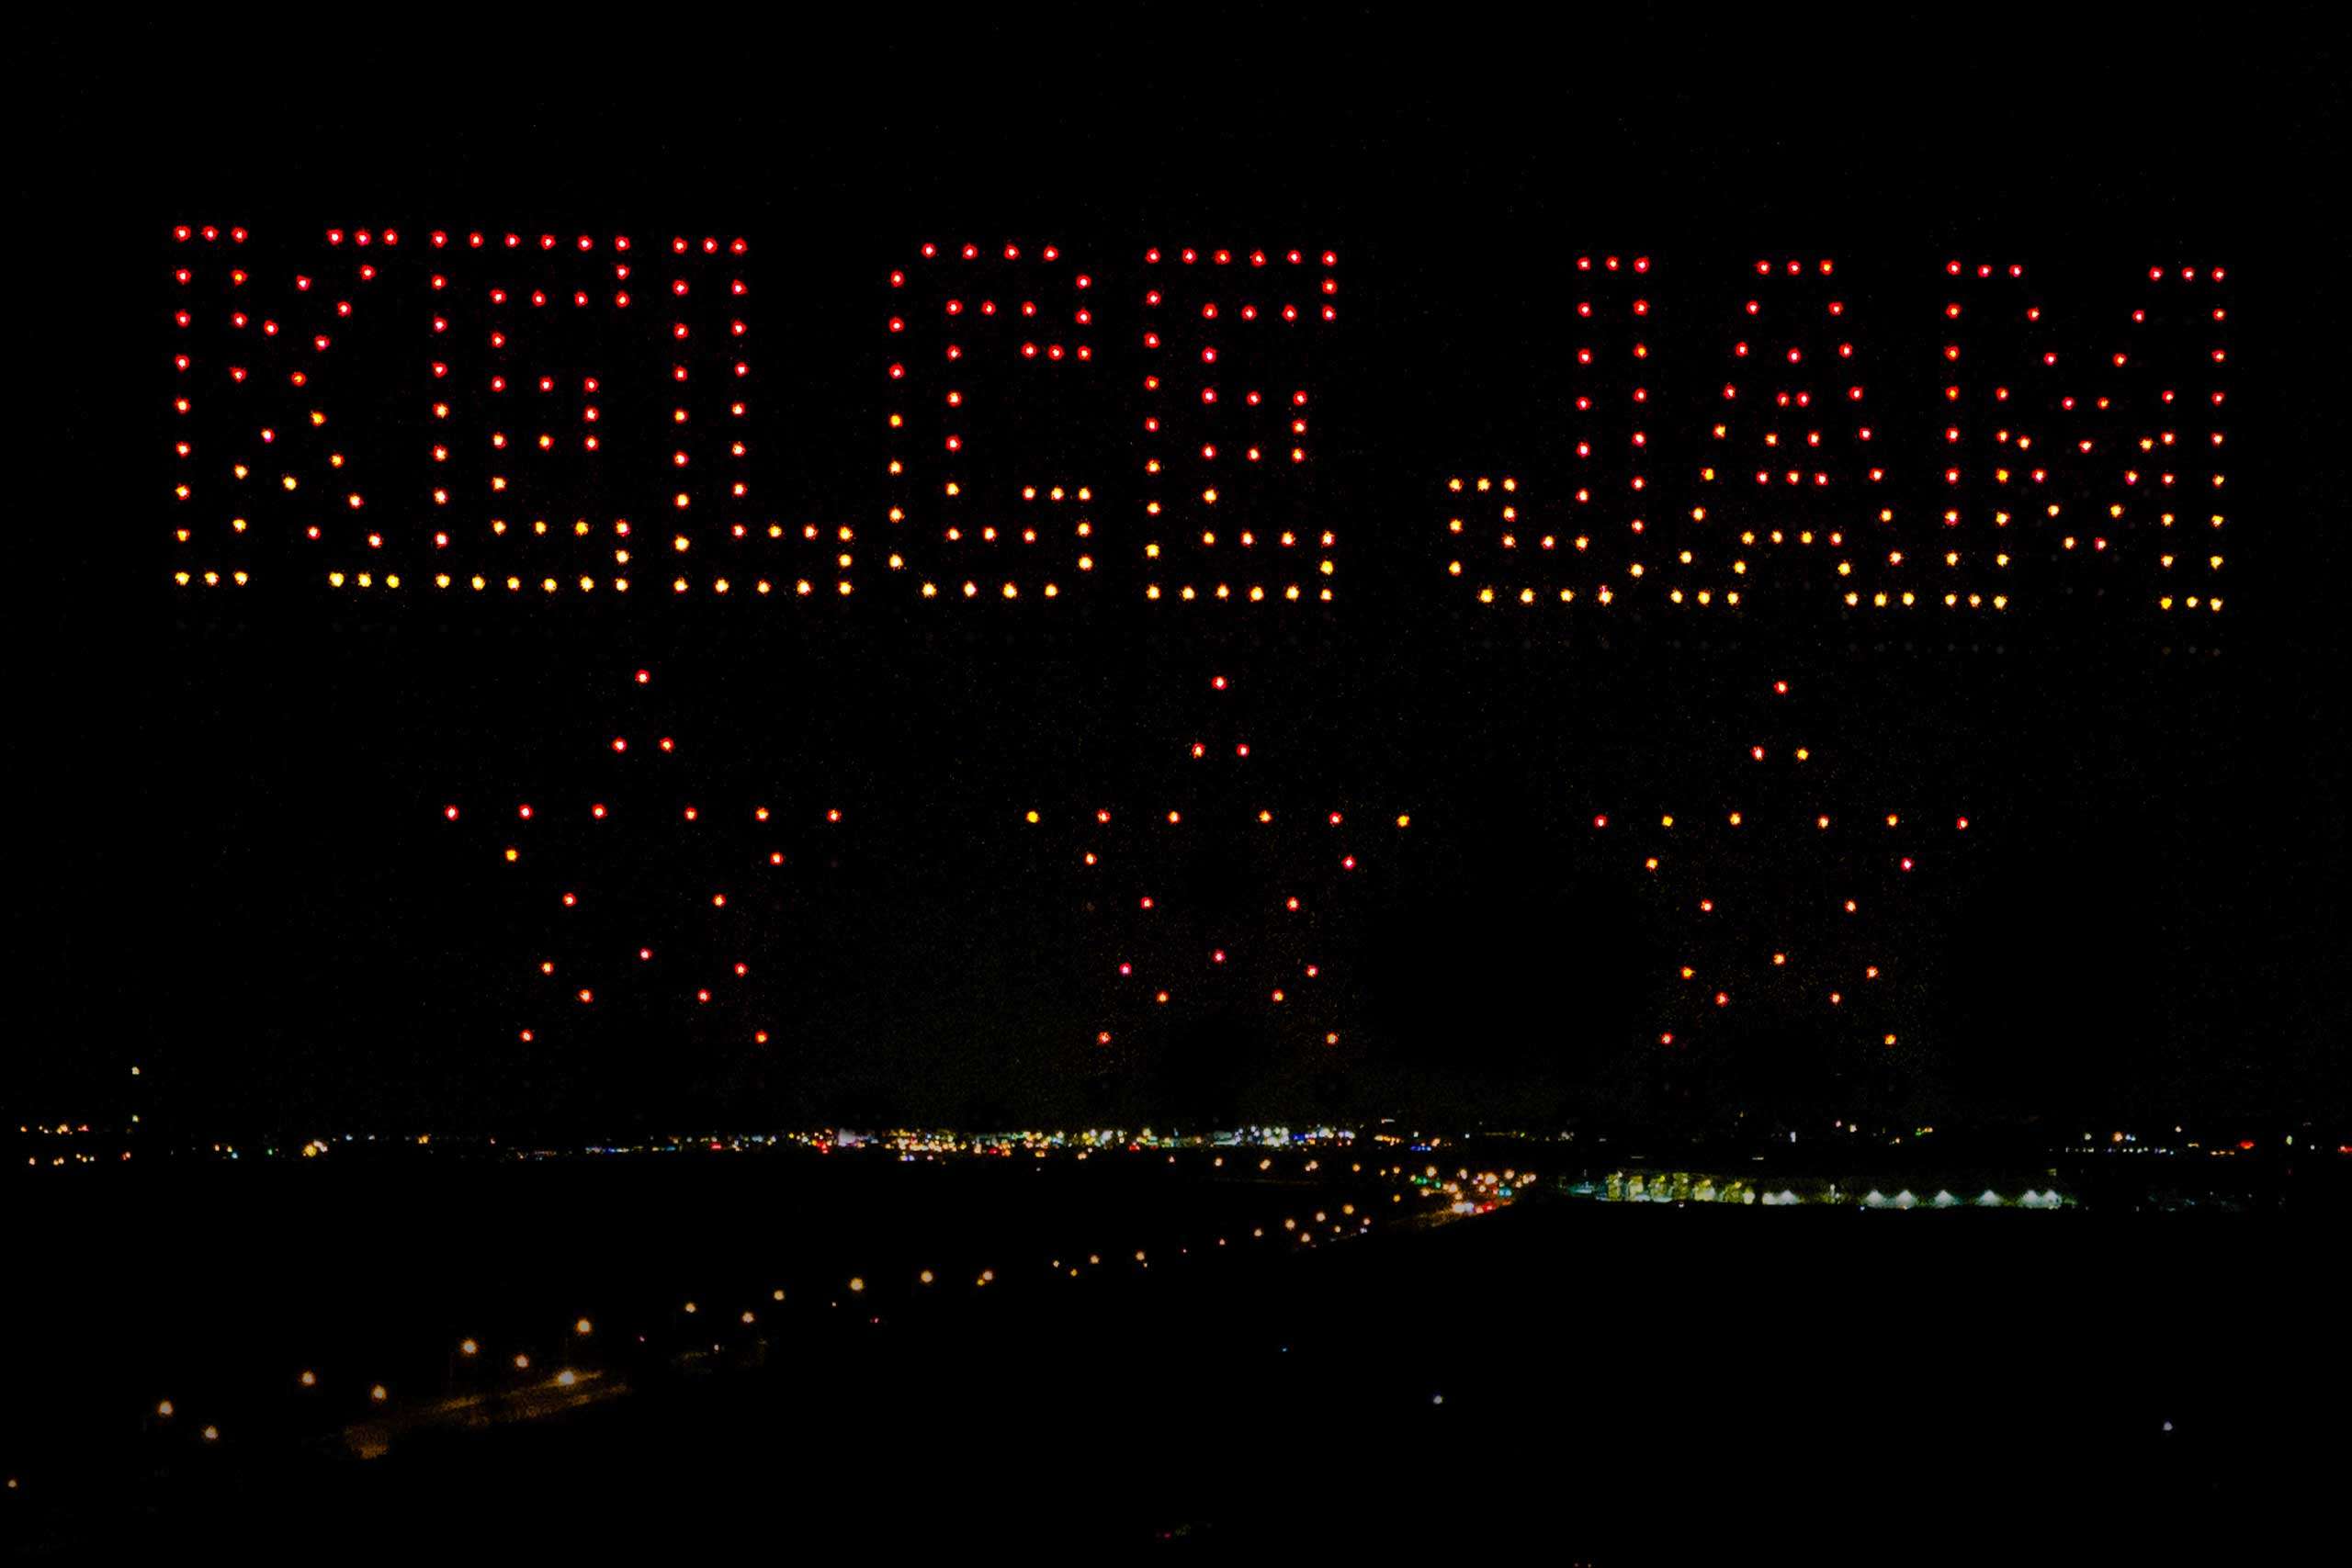 Kelce Jam written in sky at drone light show for the 2023 NFL Draft